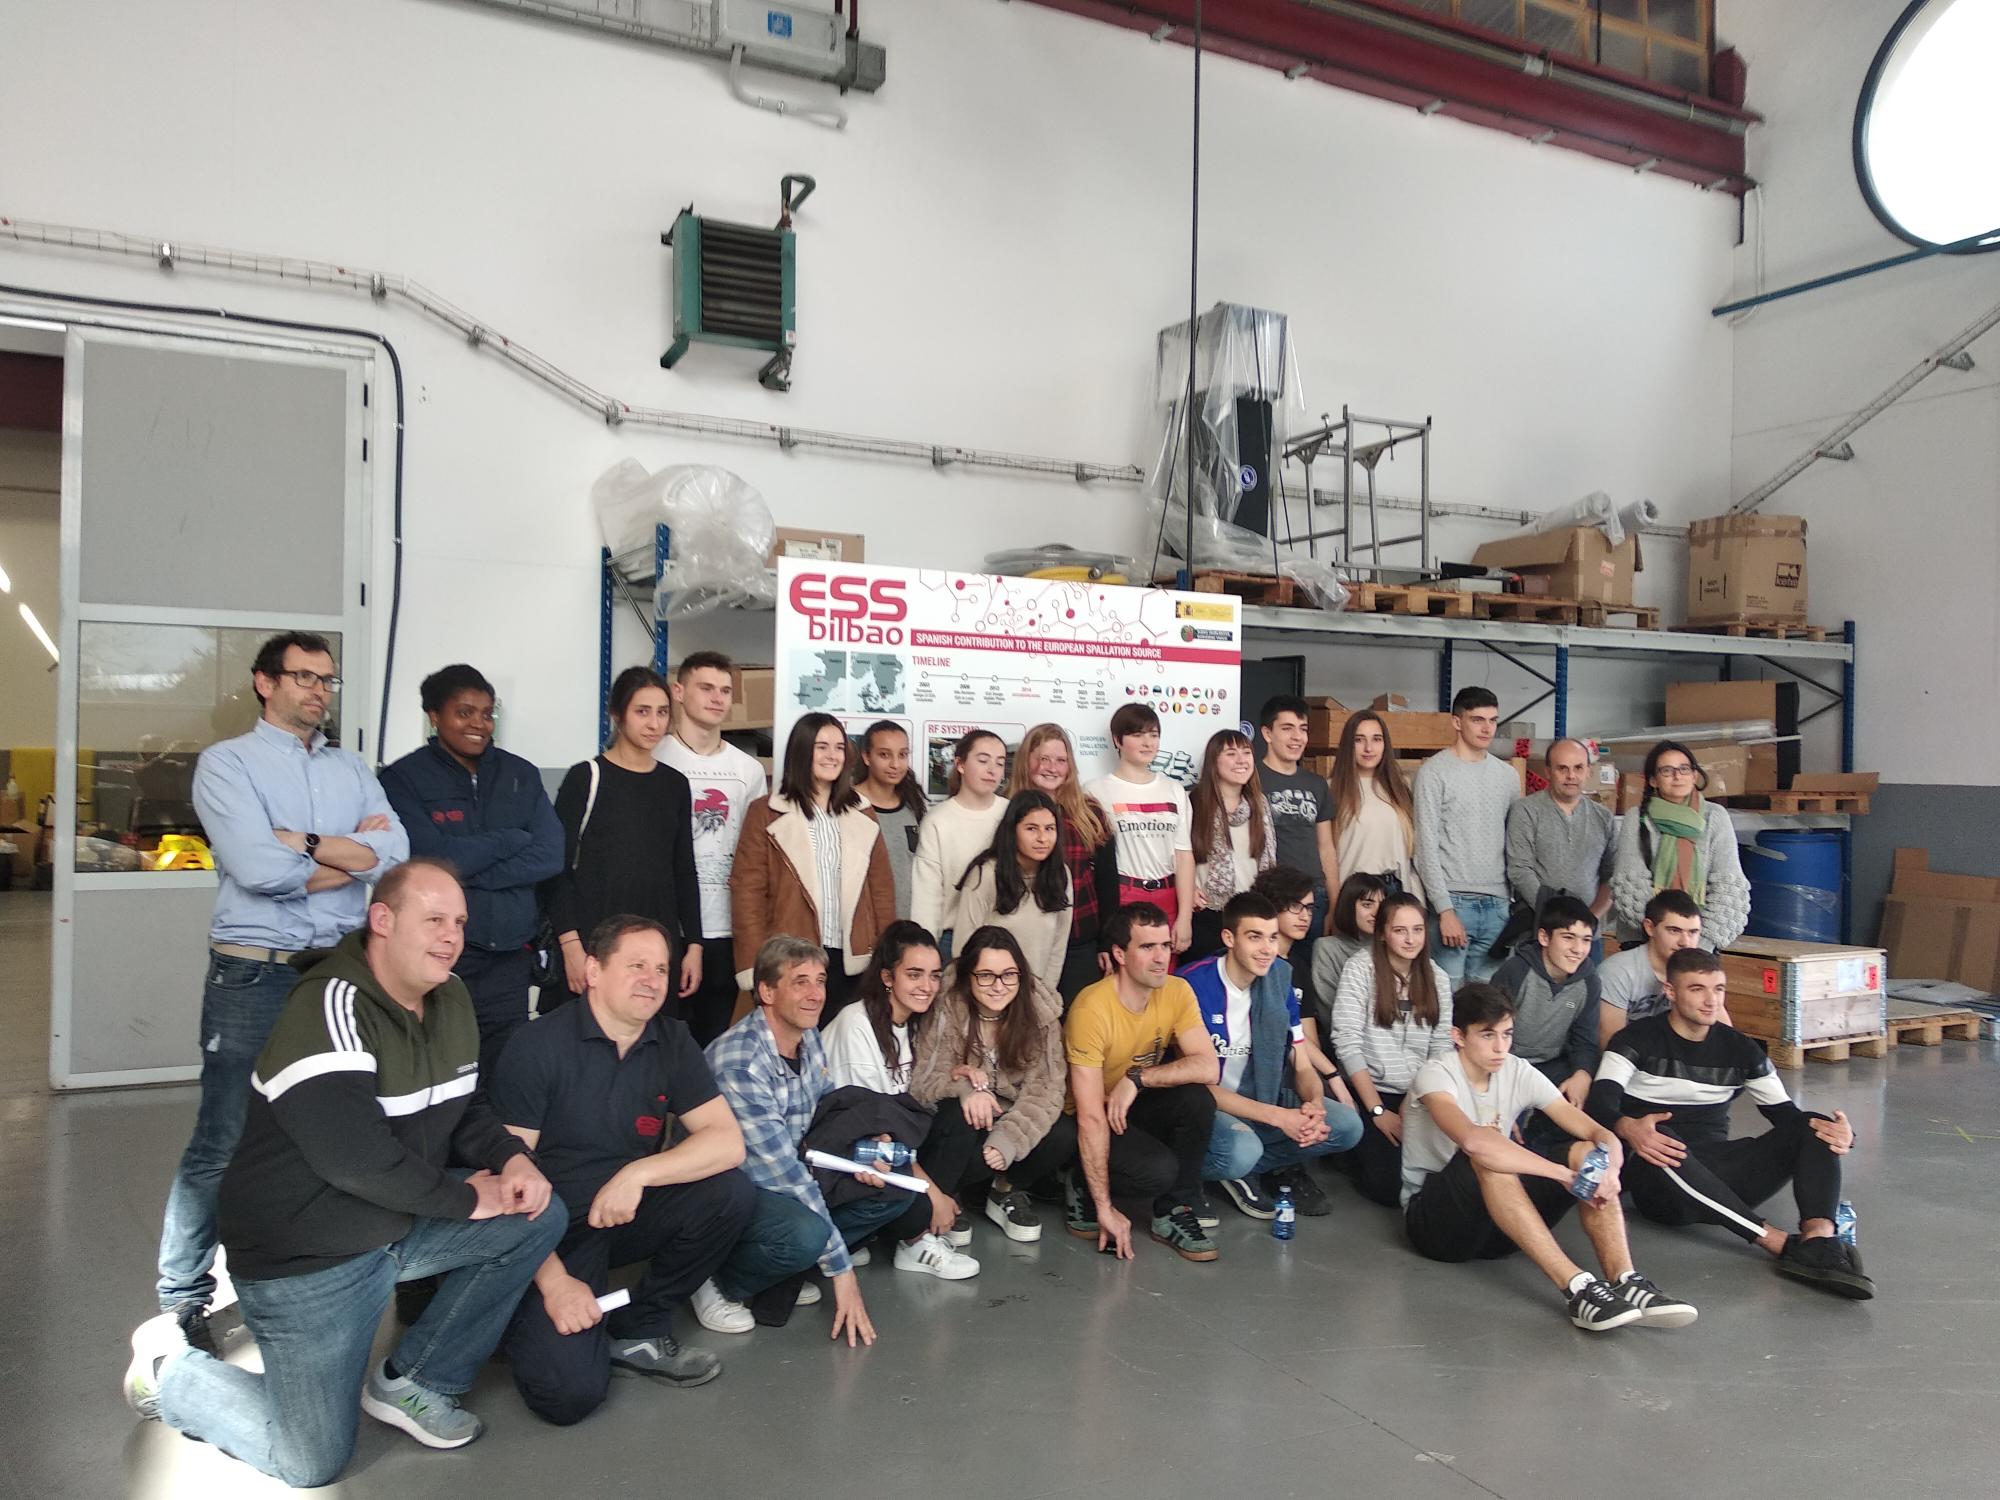 More than 20 students from the Zulaibar de Arratia educational center have visited our facilities located in the Technological Park where the team of professionals from ESS Bilbao have told us about the scientific and technological advances that are taking place.